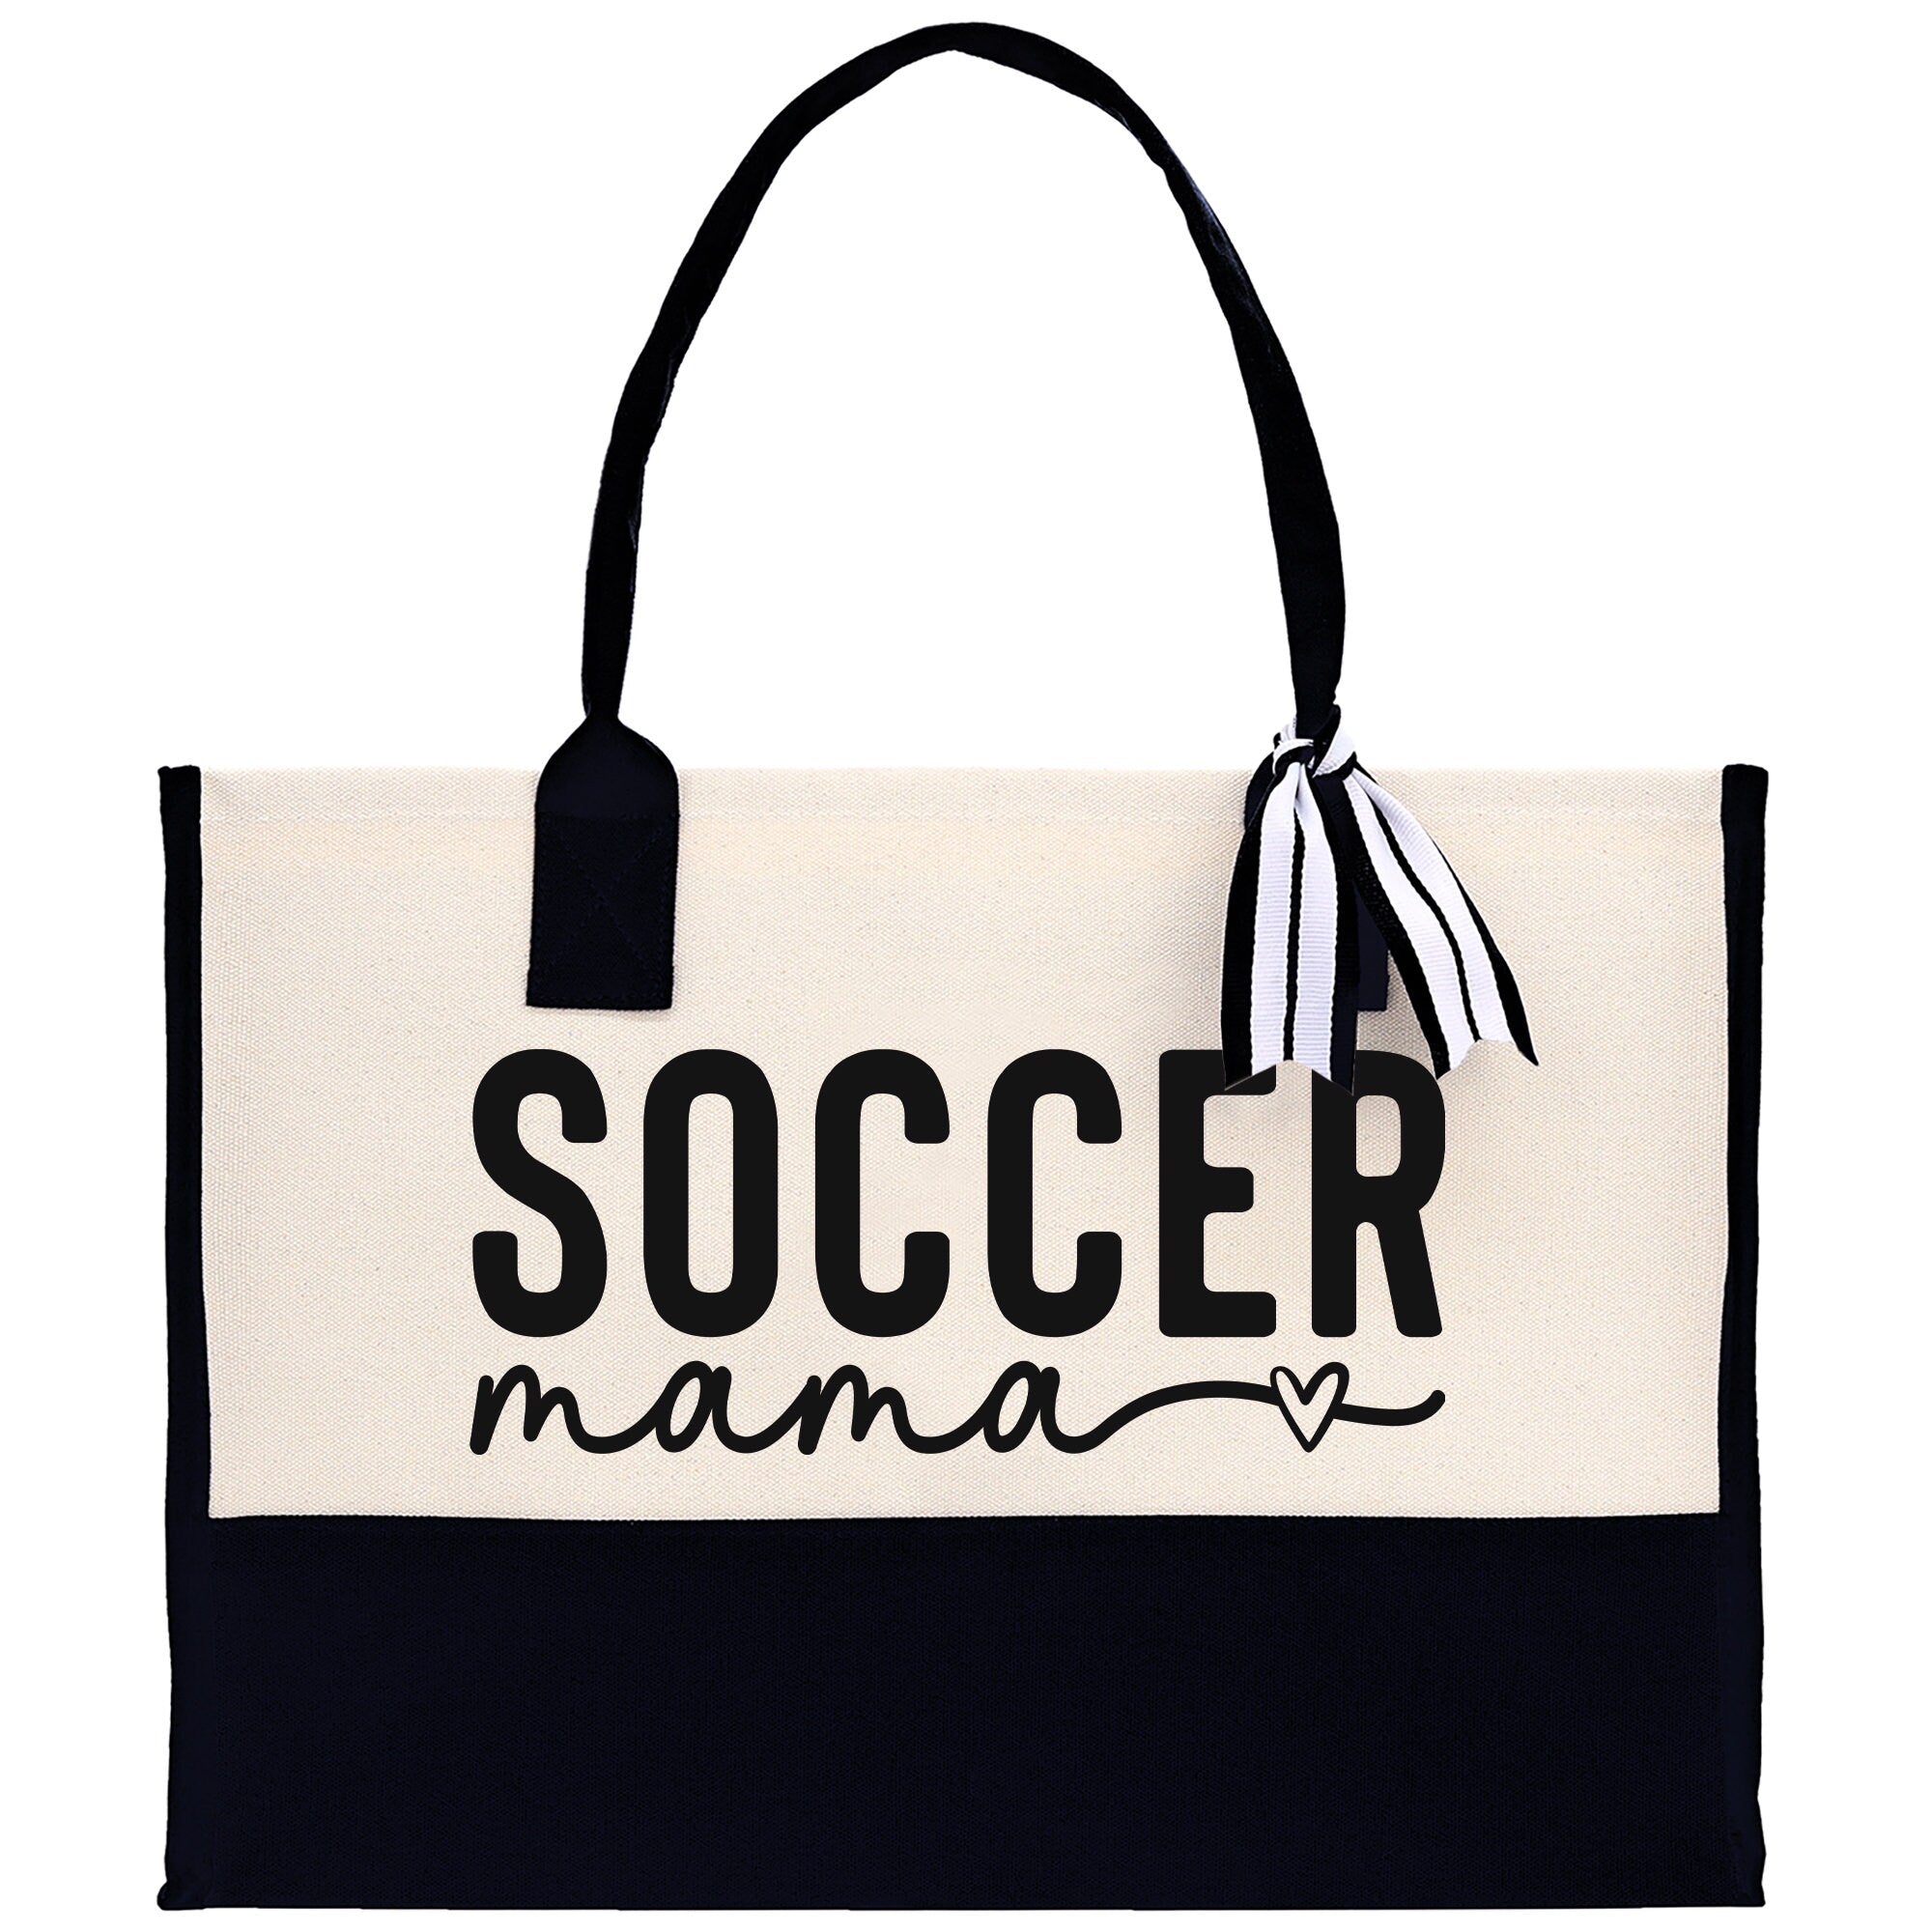 a black and white bag with the word soccer mama on it